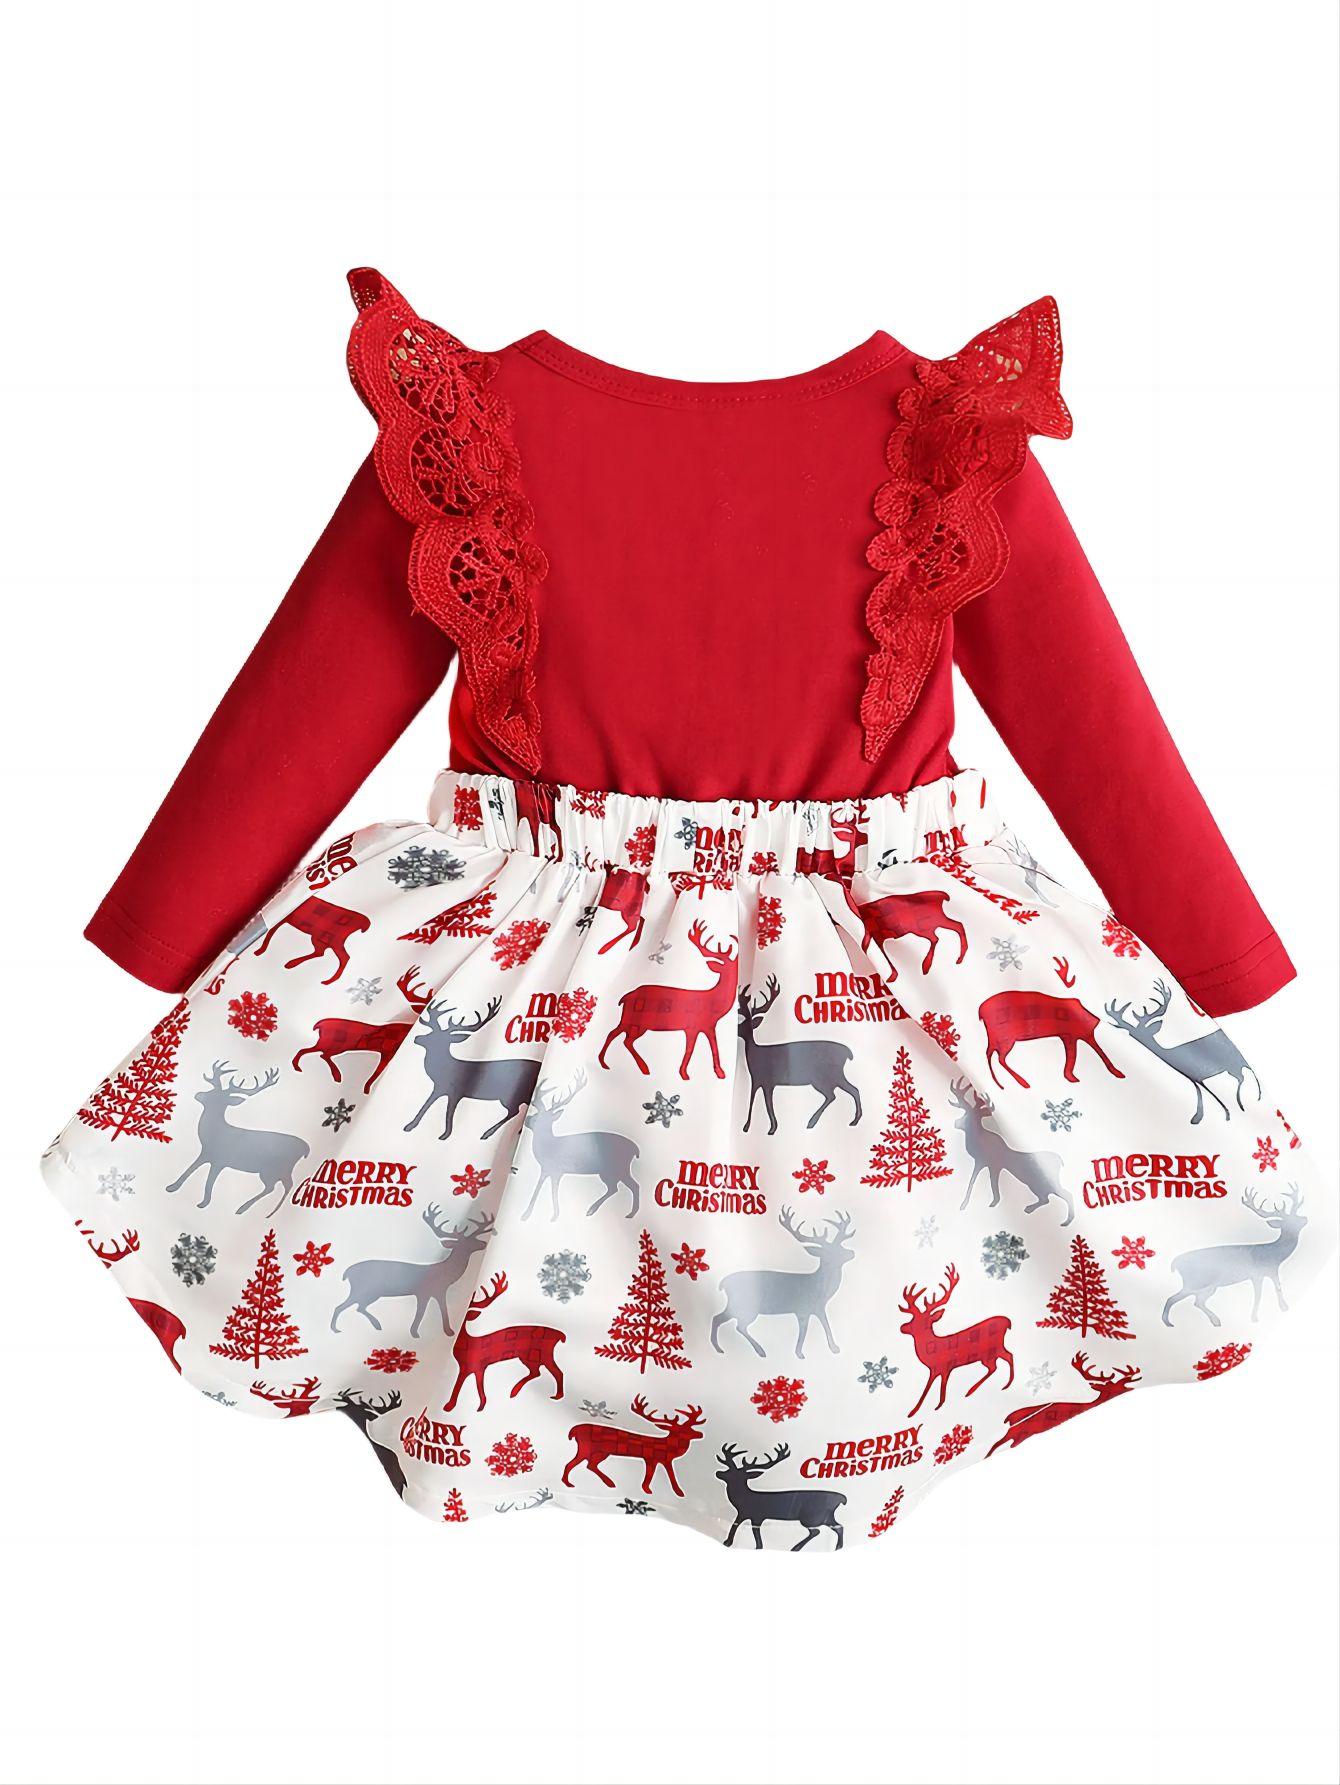 0-18M Ready Stock 0-18M Baby Girls Christmas Gift Lace Ruffle Long Sleeve Splice Elk Print Dress One Piece Romper Dress Red CatpapaYMX2008195-5F